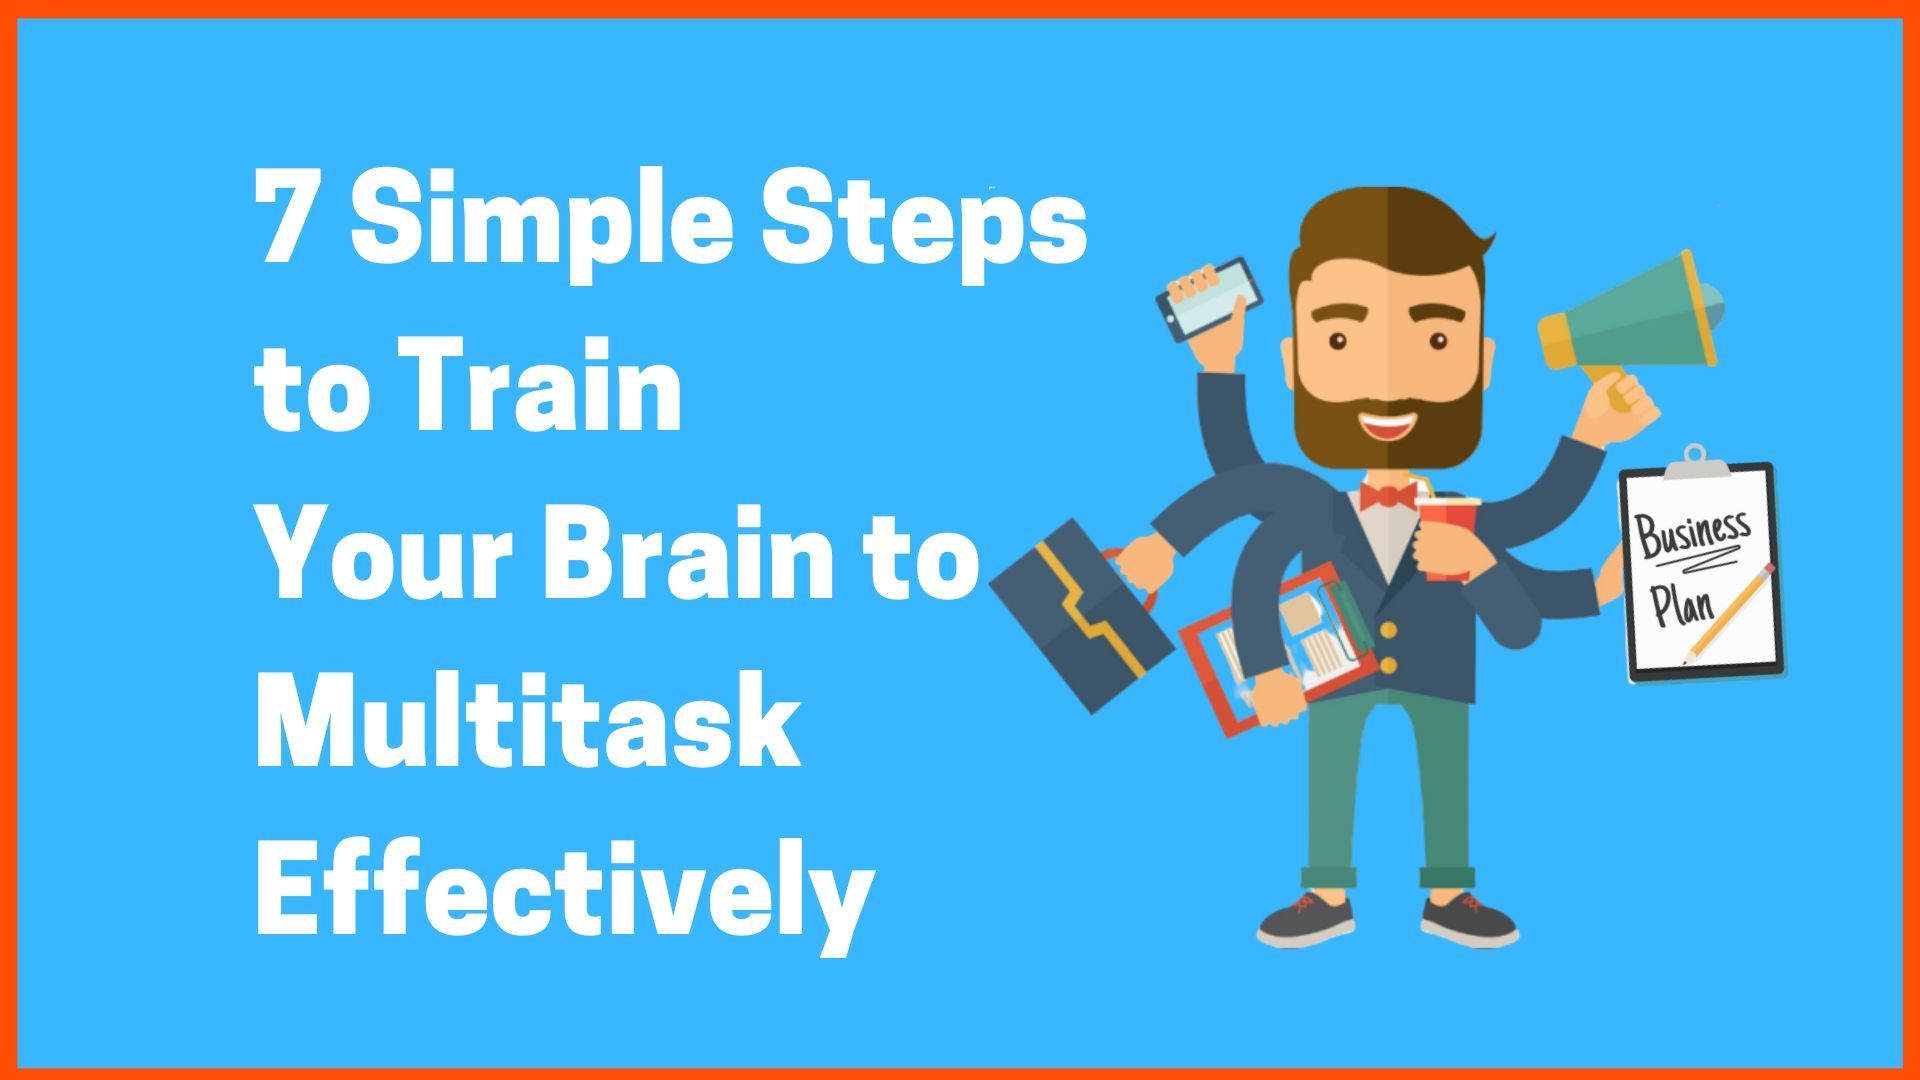 7 Simple Steps to Train Your Brain to Multitask Effectively